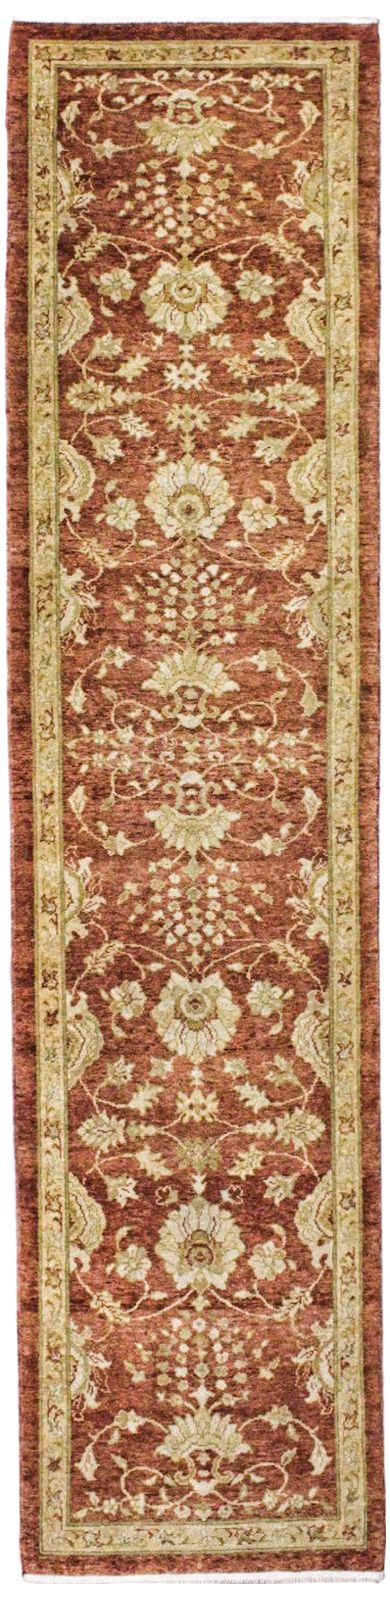 3x13 Brown and Ivory Turkish Oushak Runner